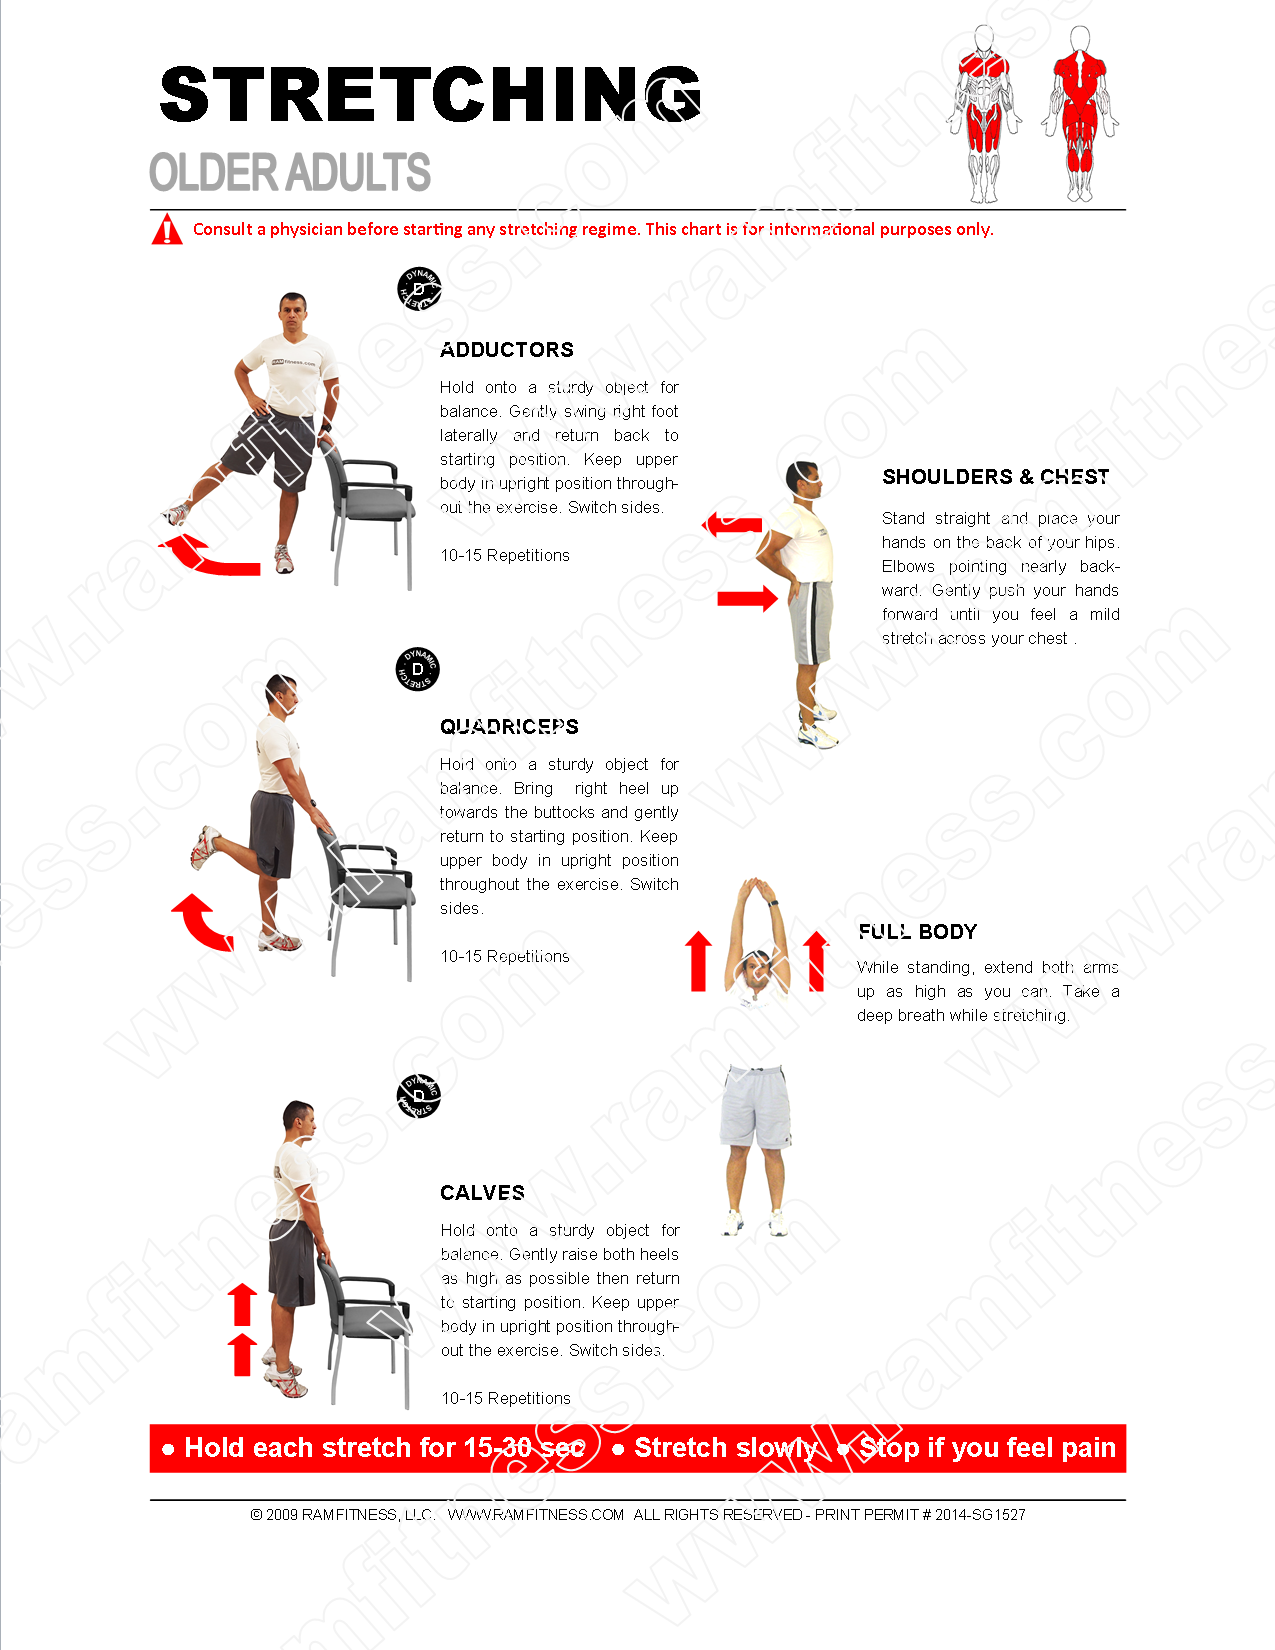 Stretching Guide for Older Adults PDF file plus tracking guide